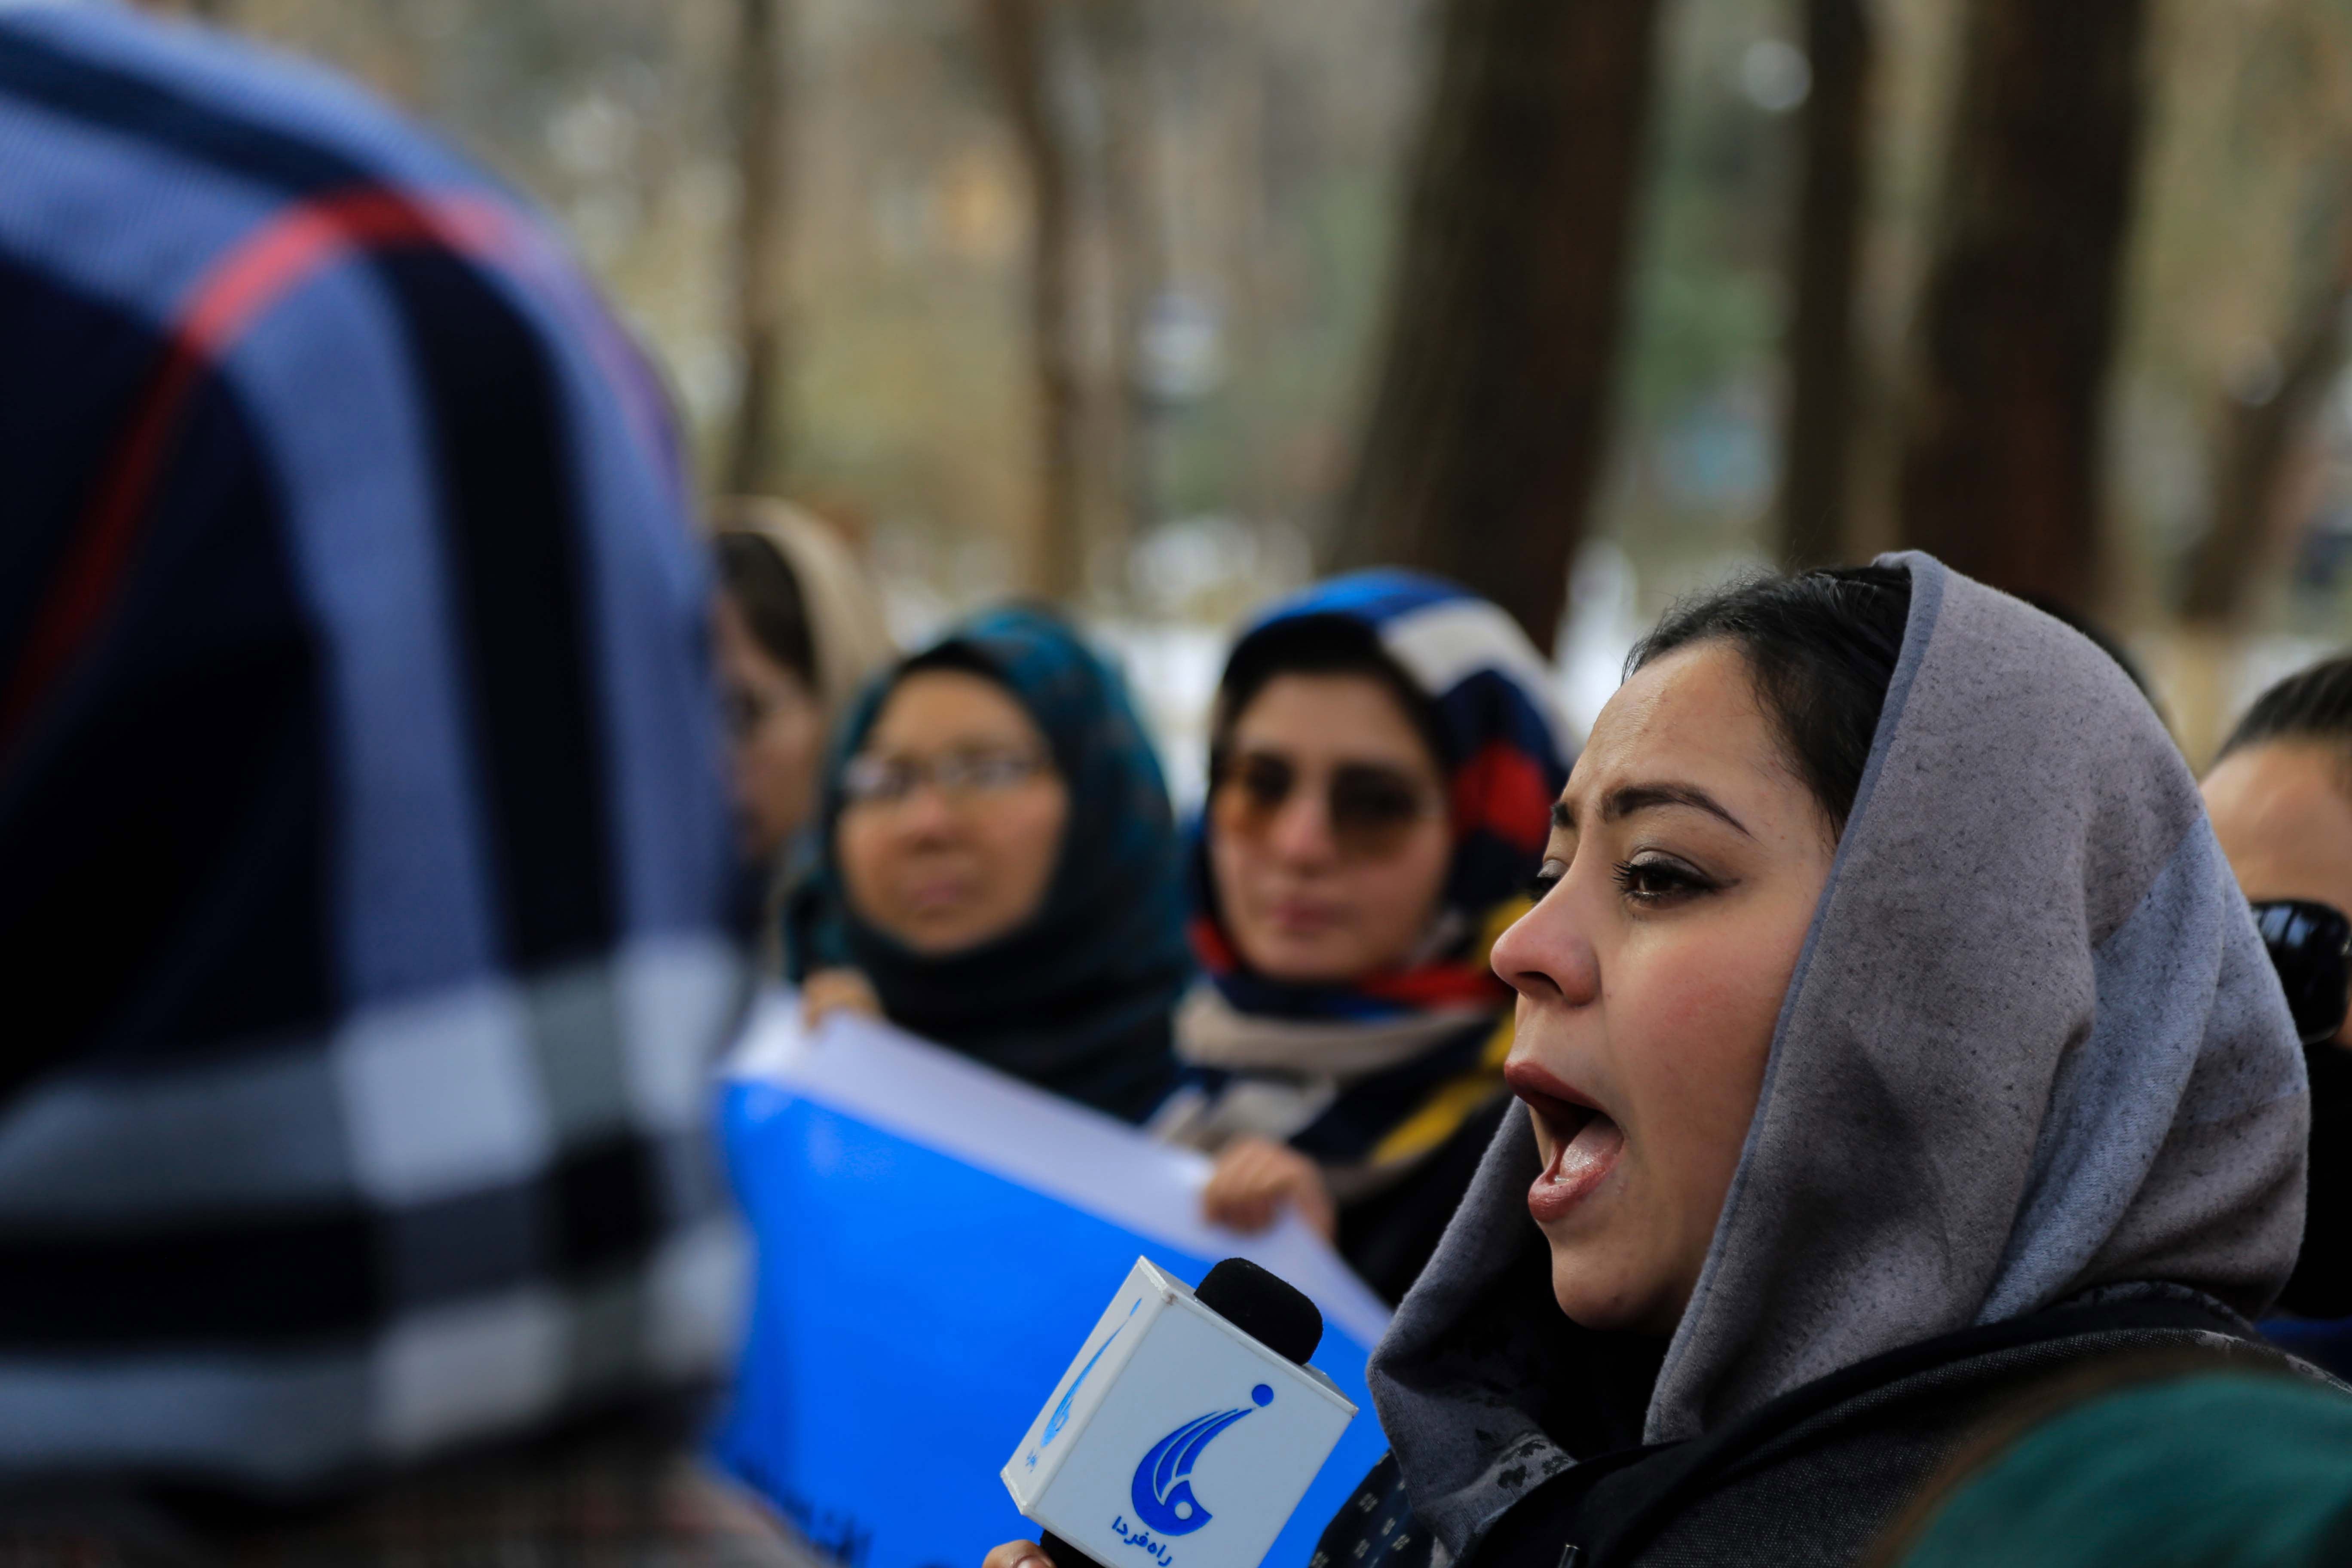 File photo: Afghan women and activists hold a banner during a protest in Kabul on 12 January 2022